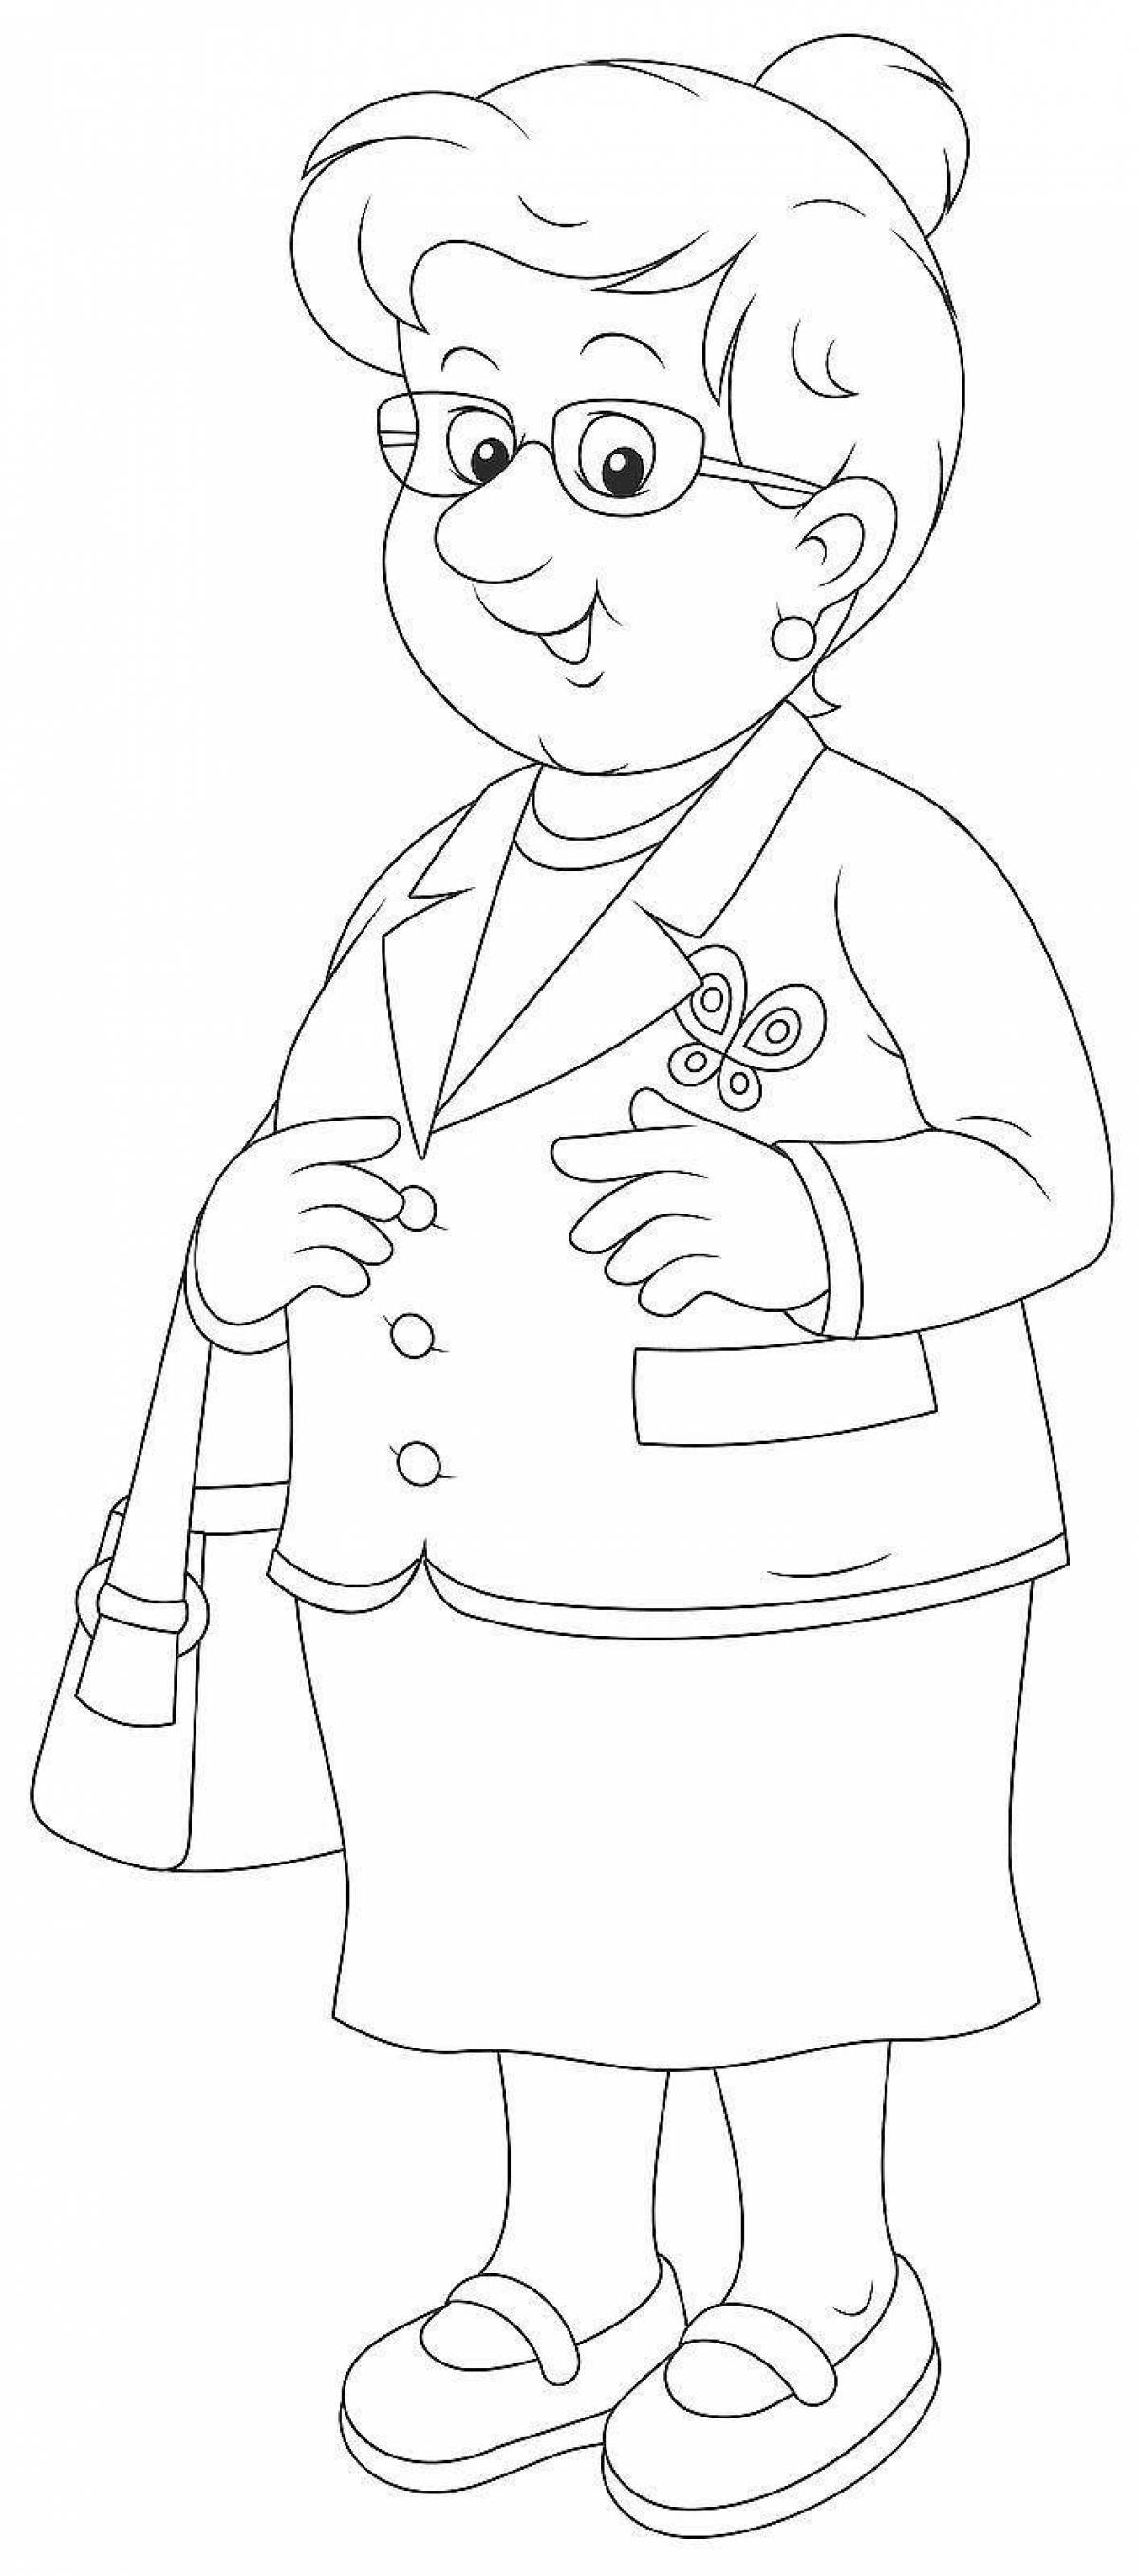 Coloring page blissful portrait of grandmother